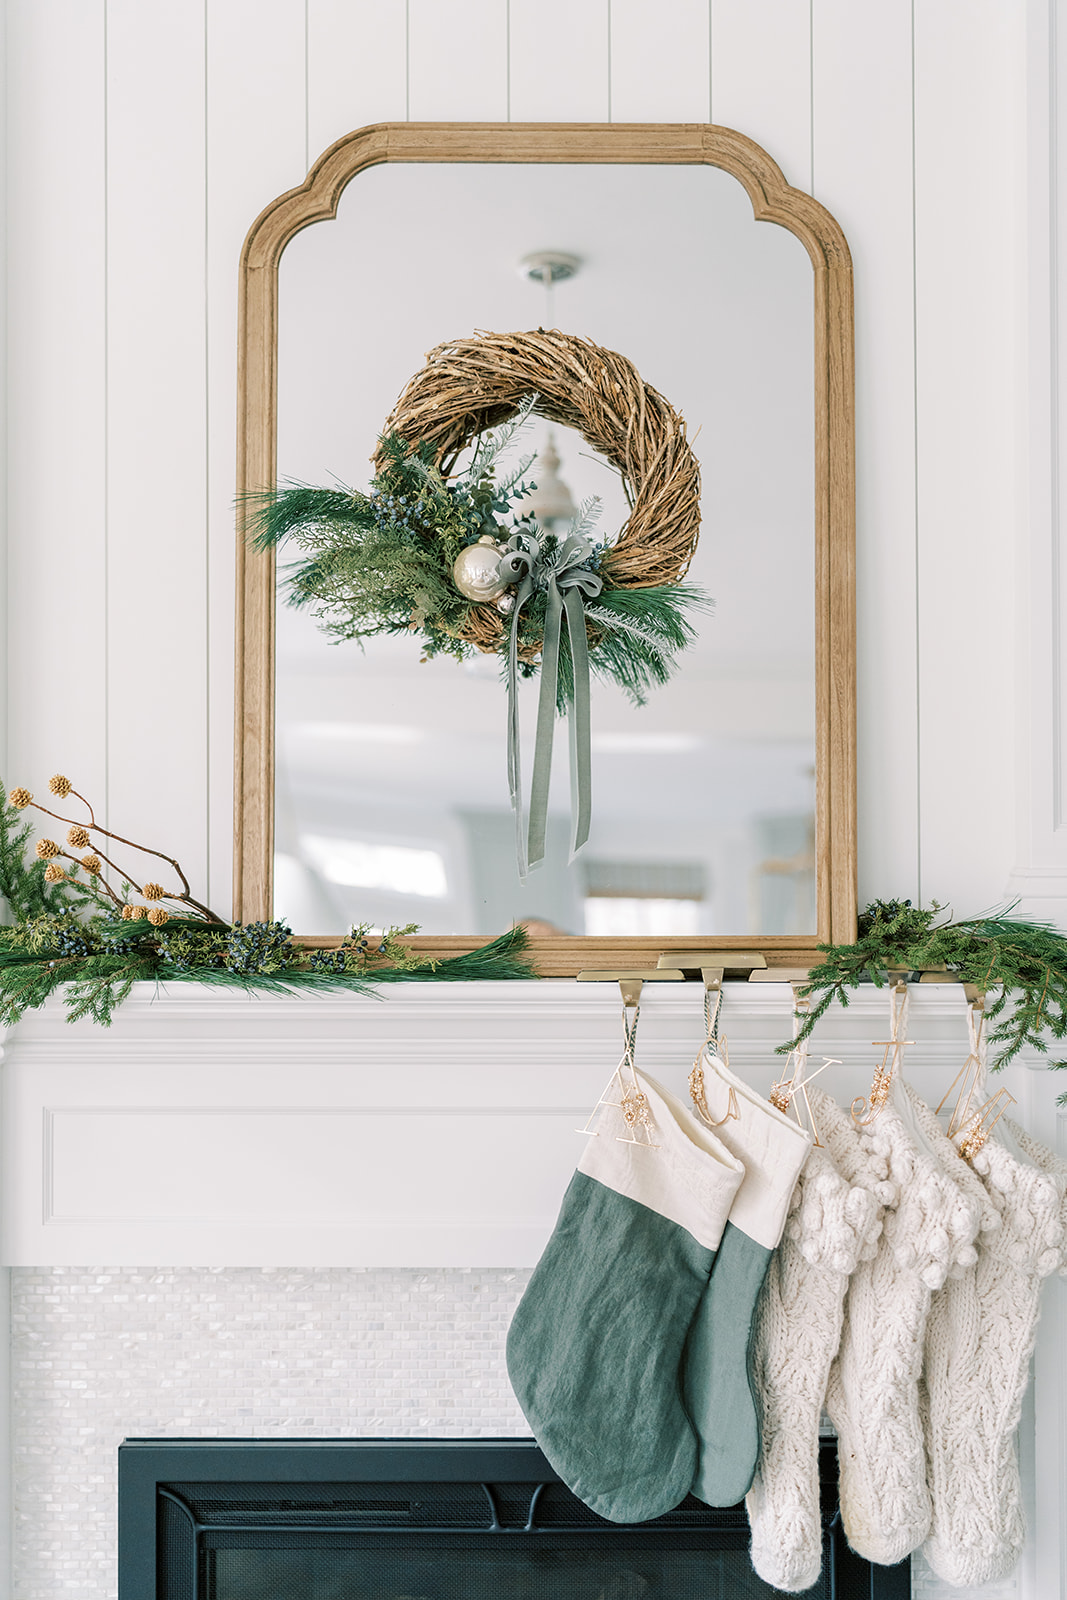 Pinecone Wreath - Finding Lovely